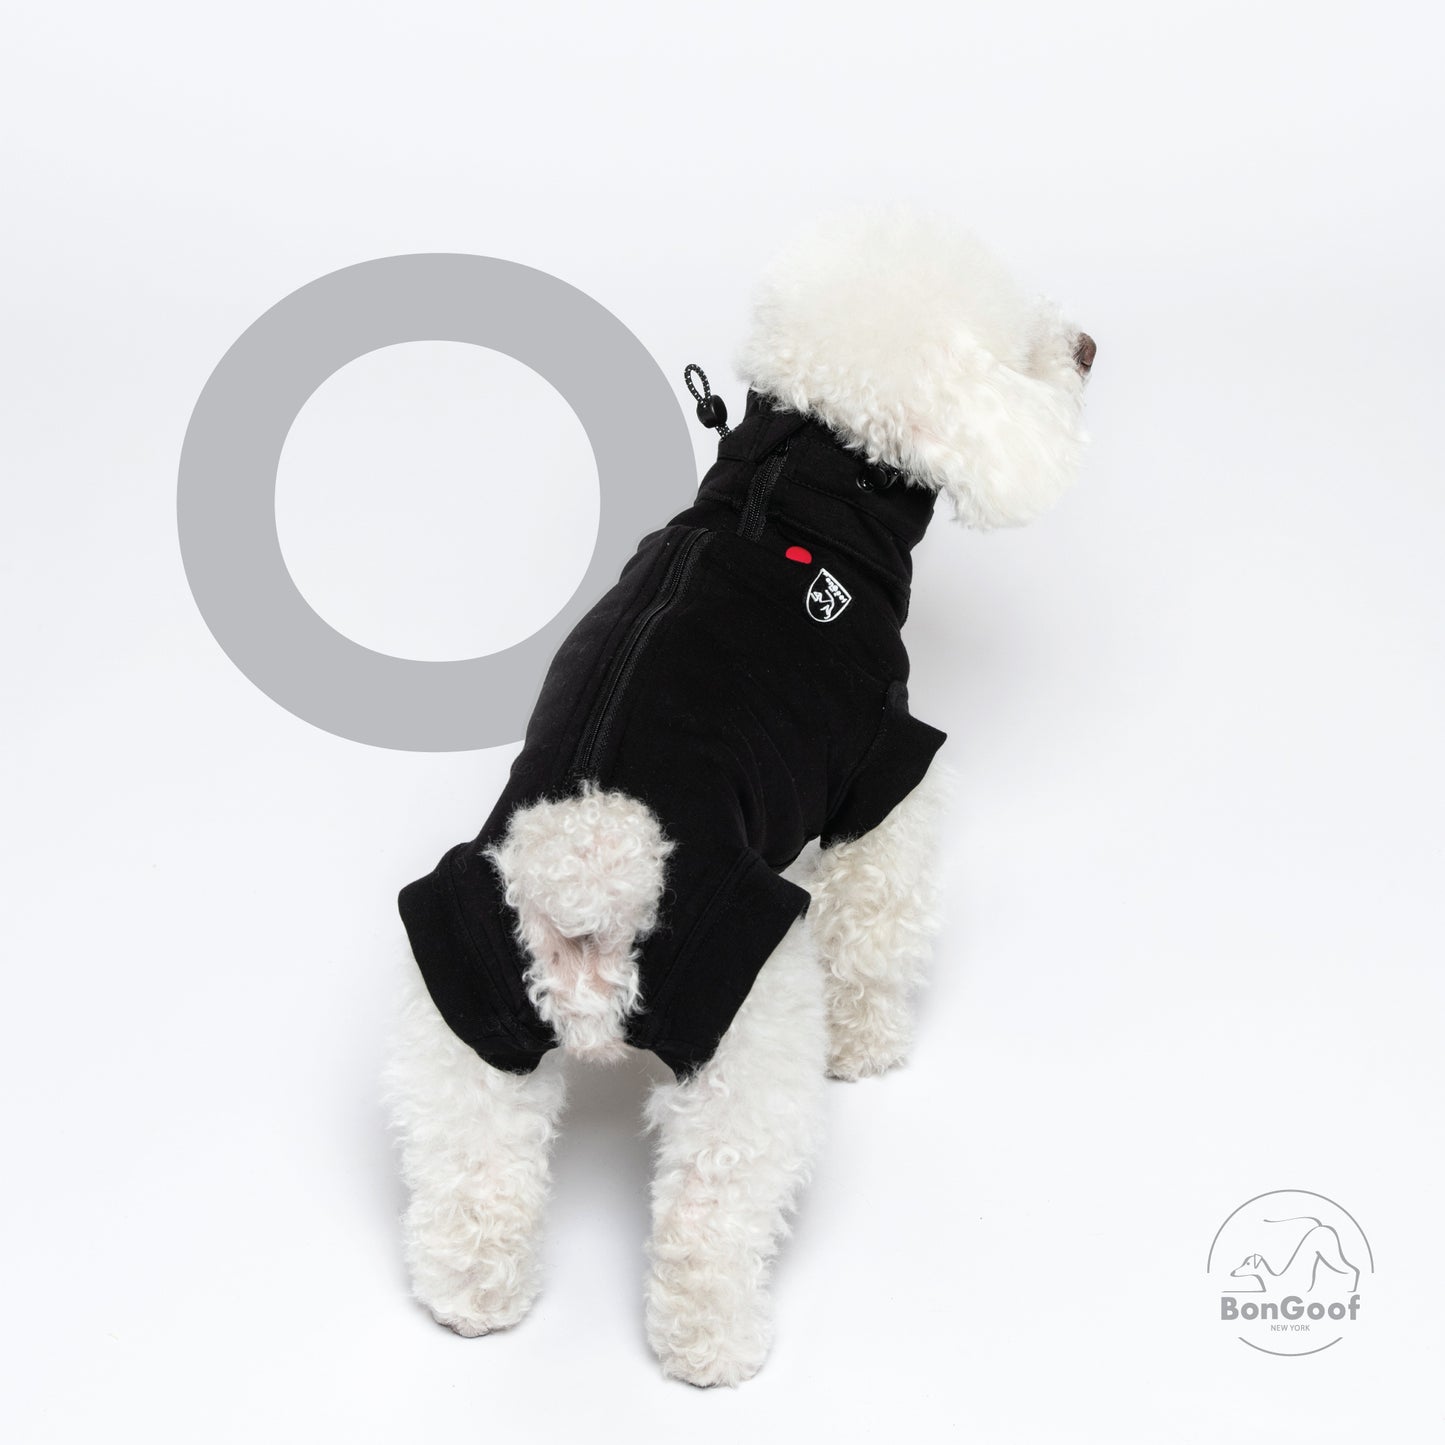 MEDITECT SUIT for Female dogs & All cats